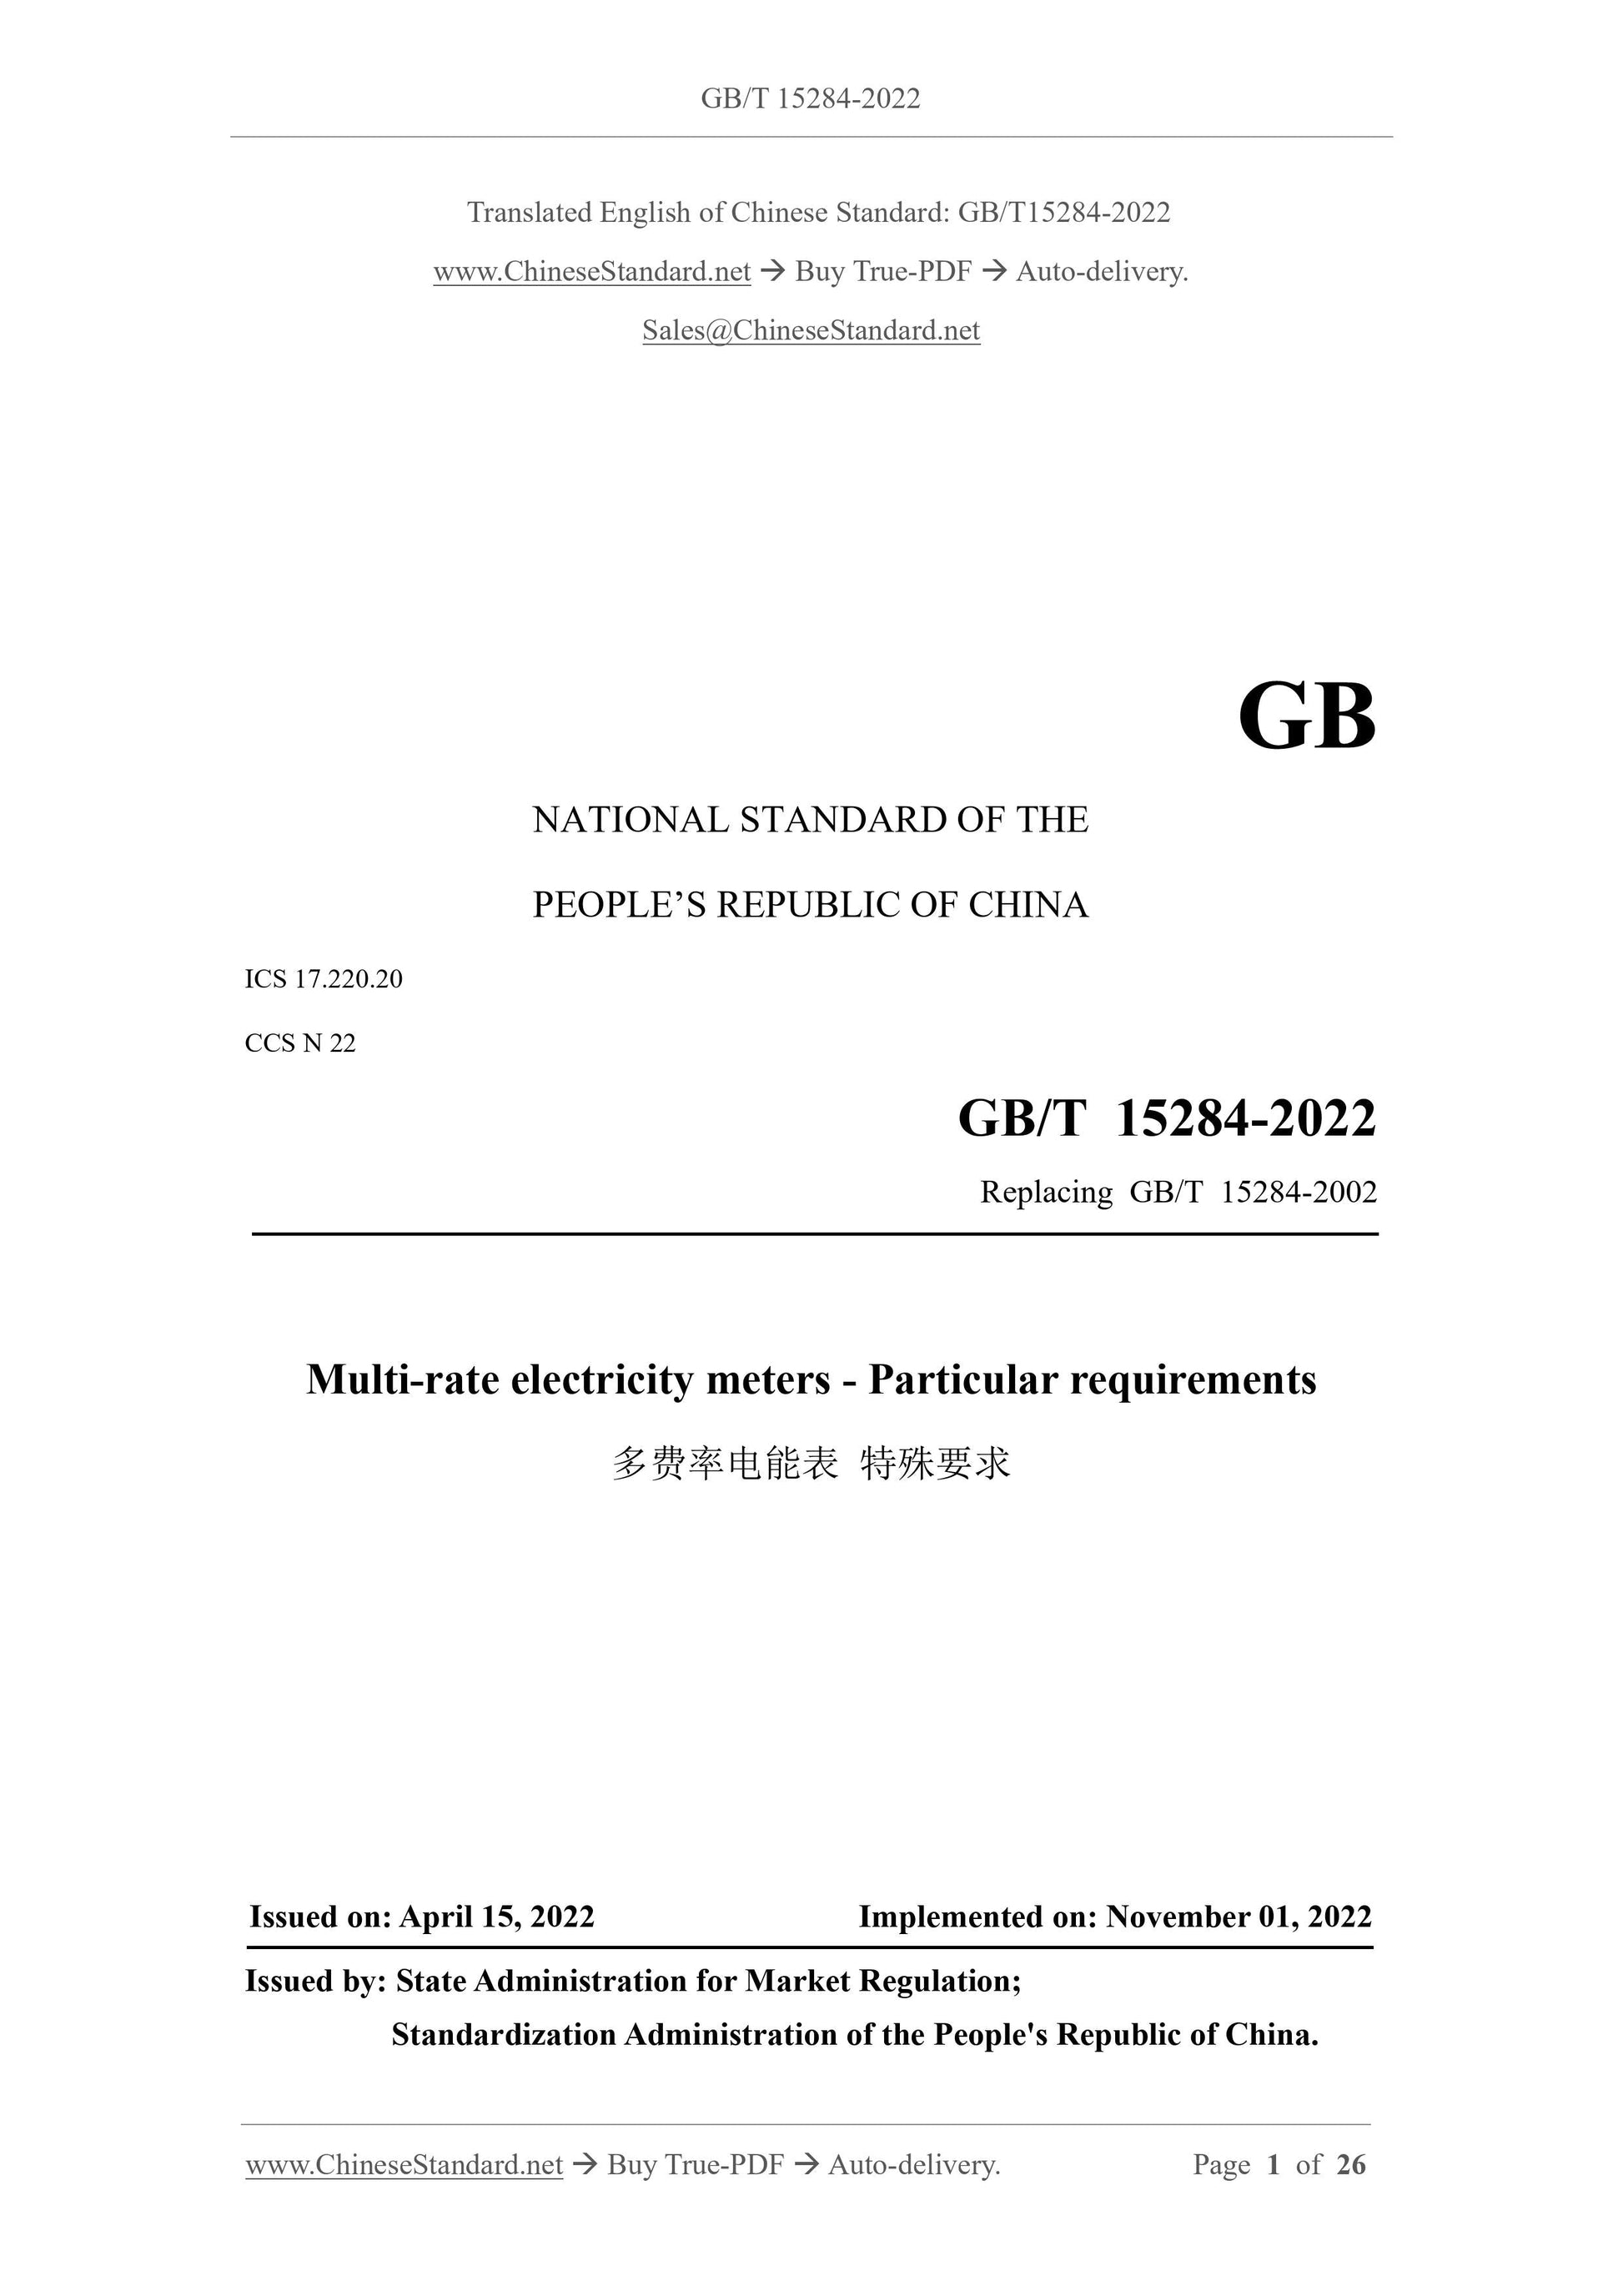 GB/T 15284-2022 Page 1